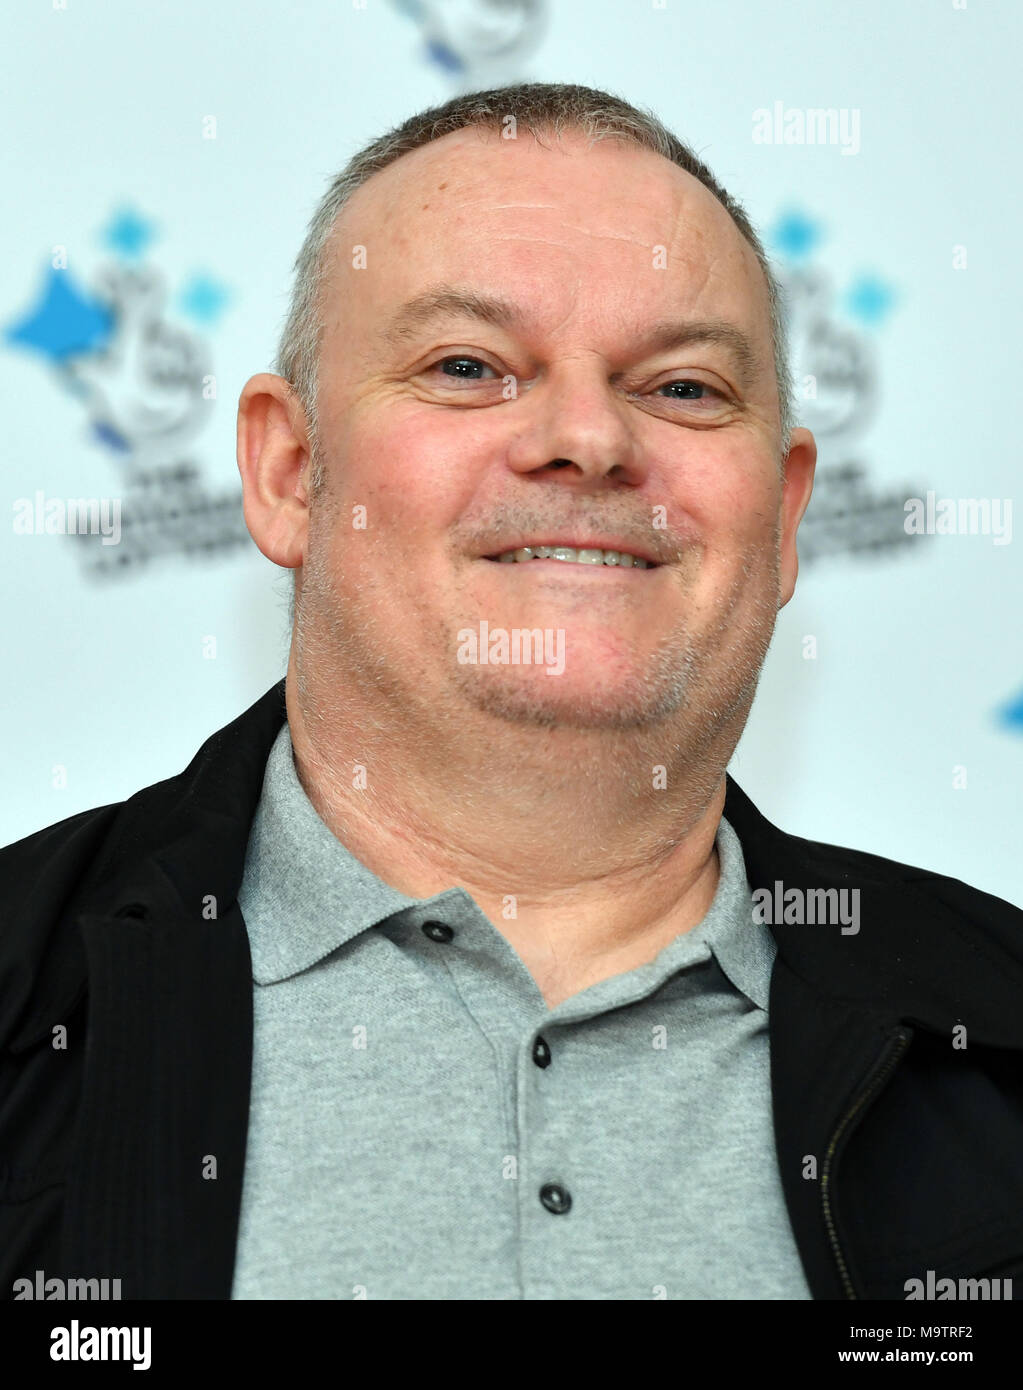 Father of three and life-long Leyton Orient fan from Wickford, Paul Long, celebrates after his Lucky Dip ticket matched all six numbers to scoop the £9,339,858 Lotto Jackpot on Saturday 24 March, at the Orsett Hall Hotel, in Orsett, Essex. Stock Photo